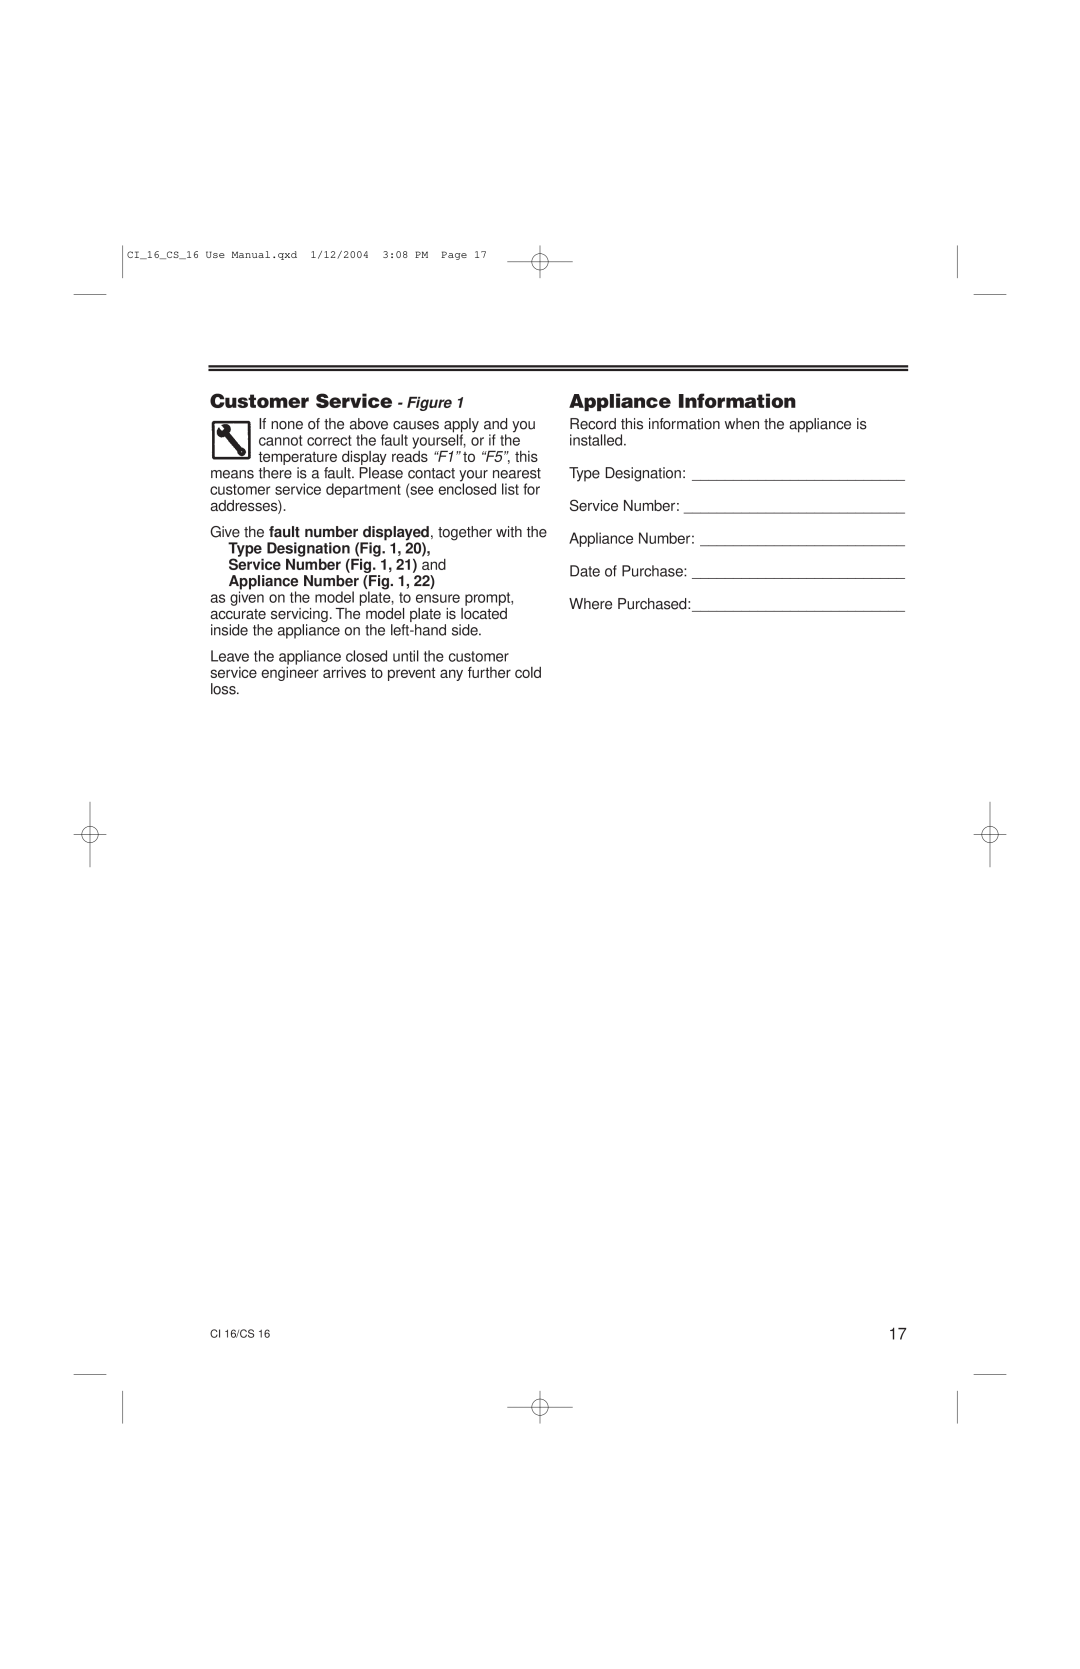 Liebherr CI16 Customer Service - Figure, Appliance Information, Type Designation Service Number , 21 and, Appliance Number 